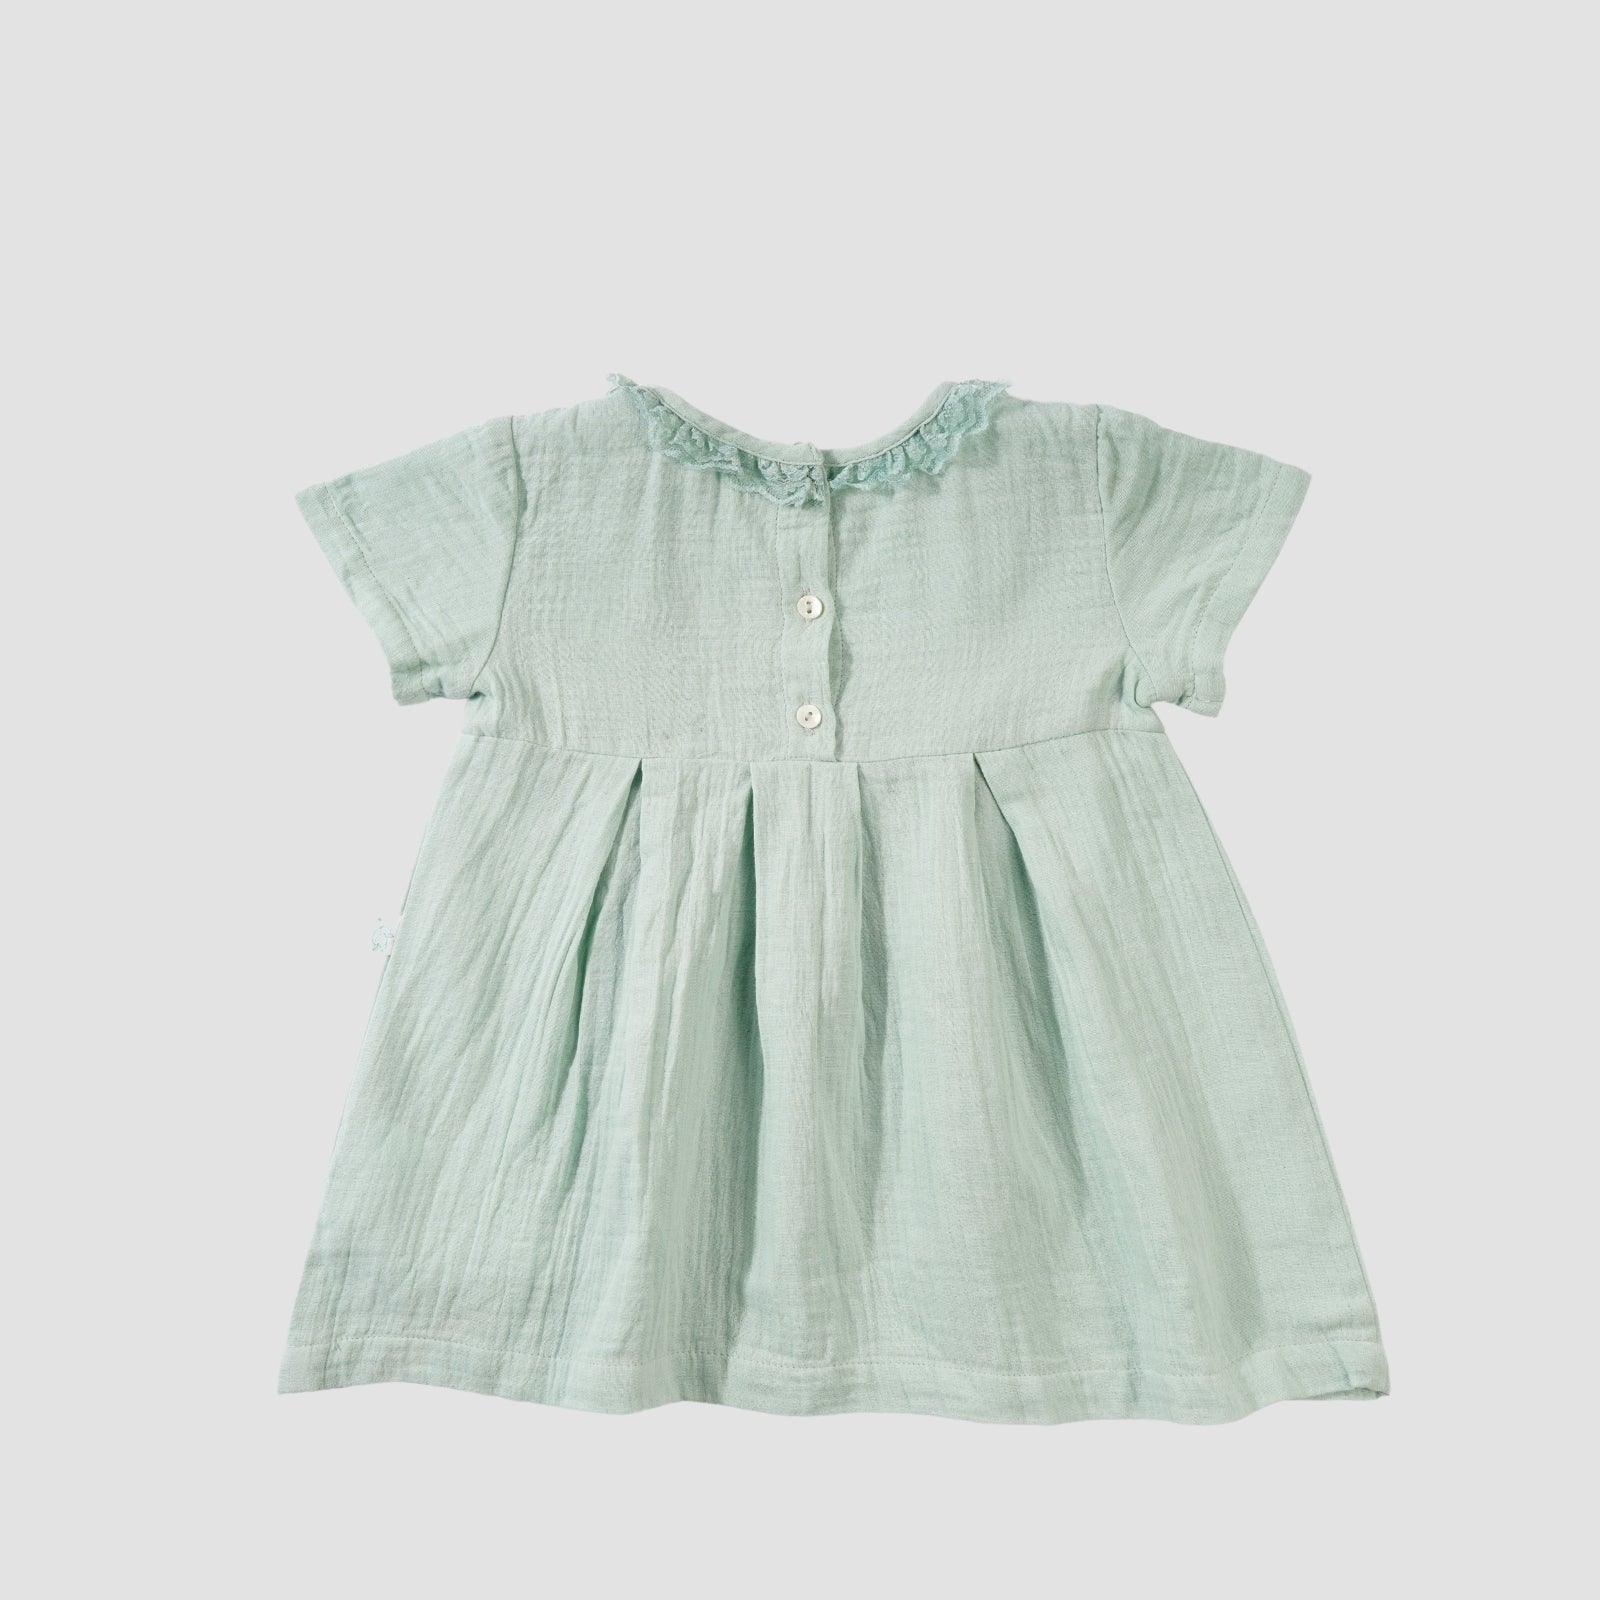 Greendeer Mint Pleated Cotton Frock with Bloomer